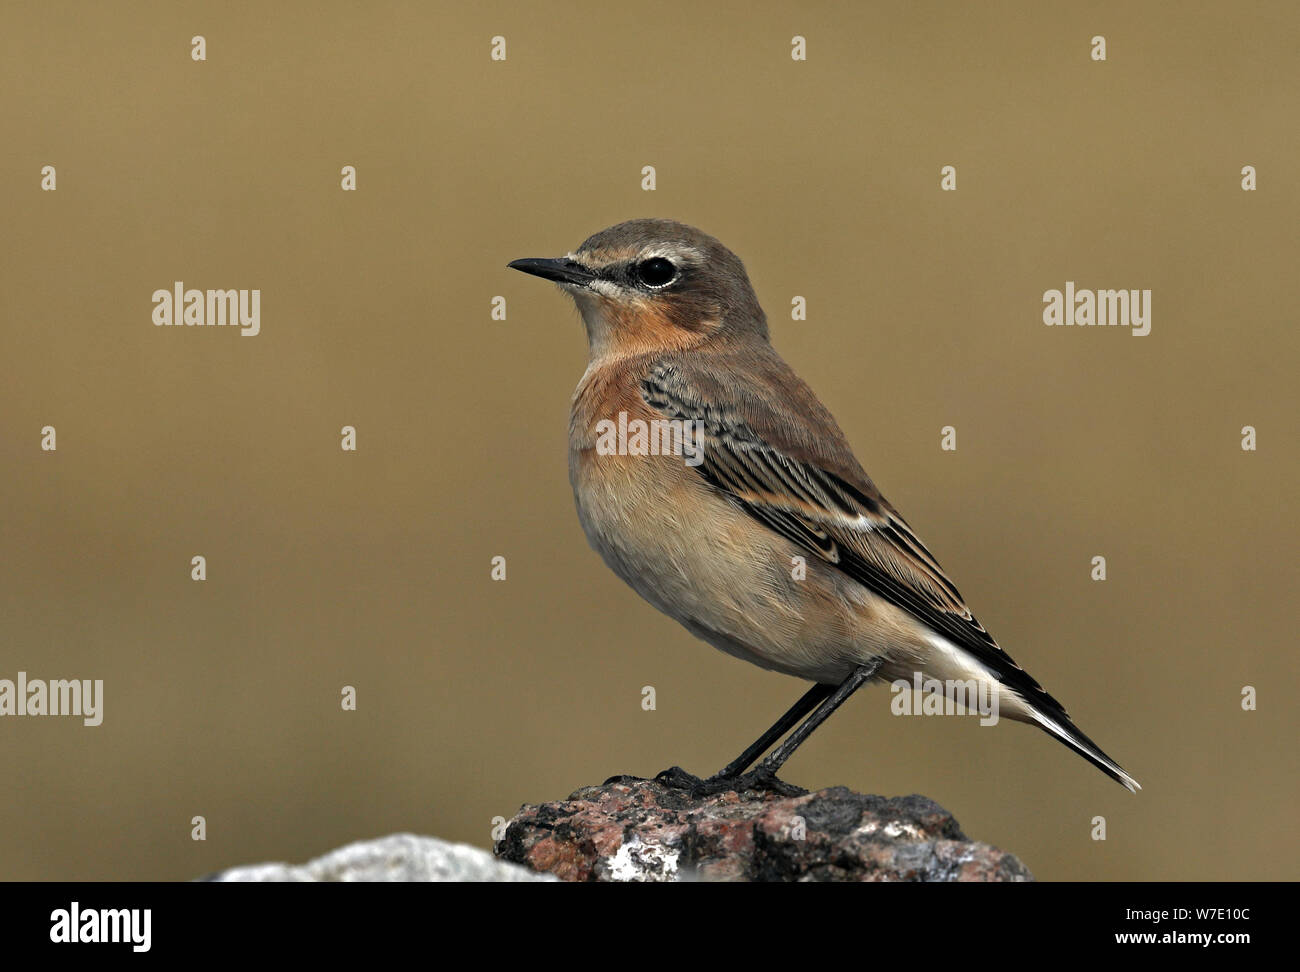 Northern wheatear, Oenanthe oenanthe standing on stone Stock Photo